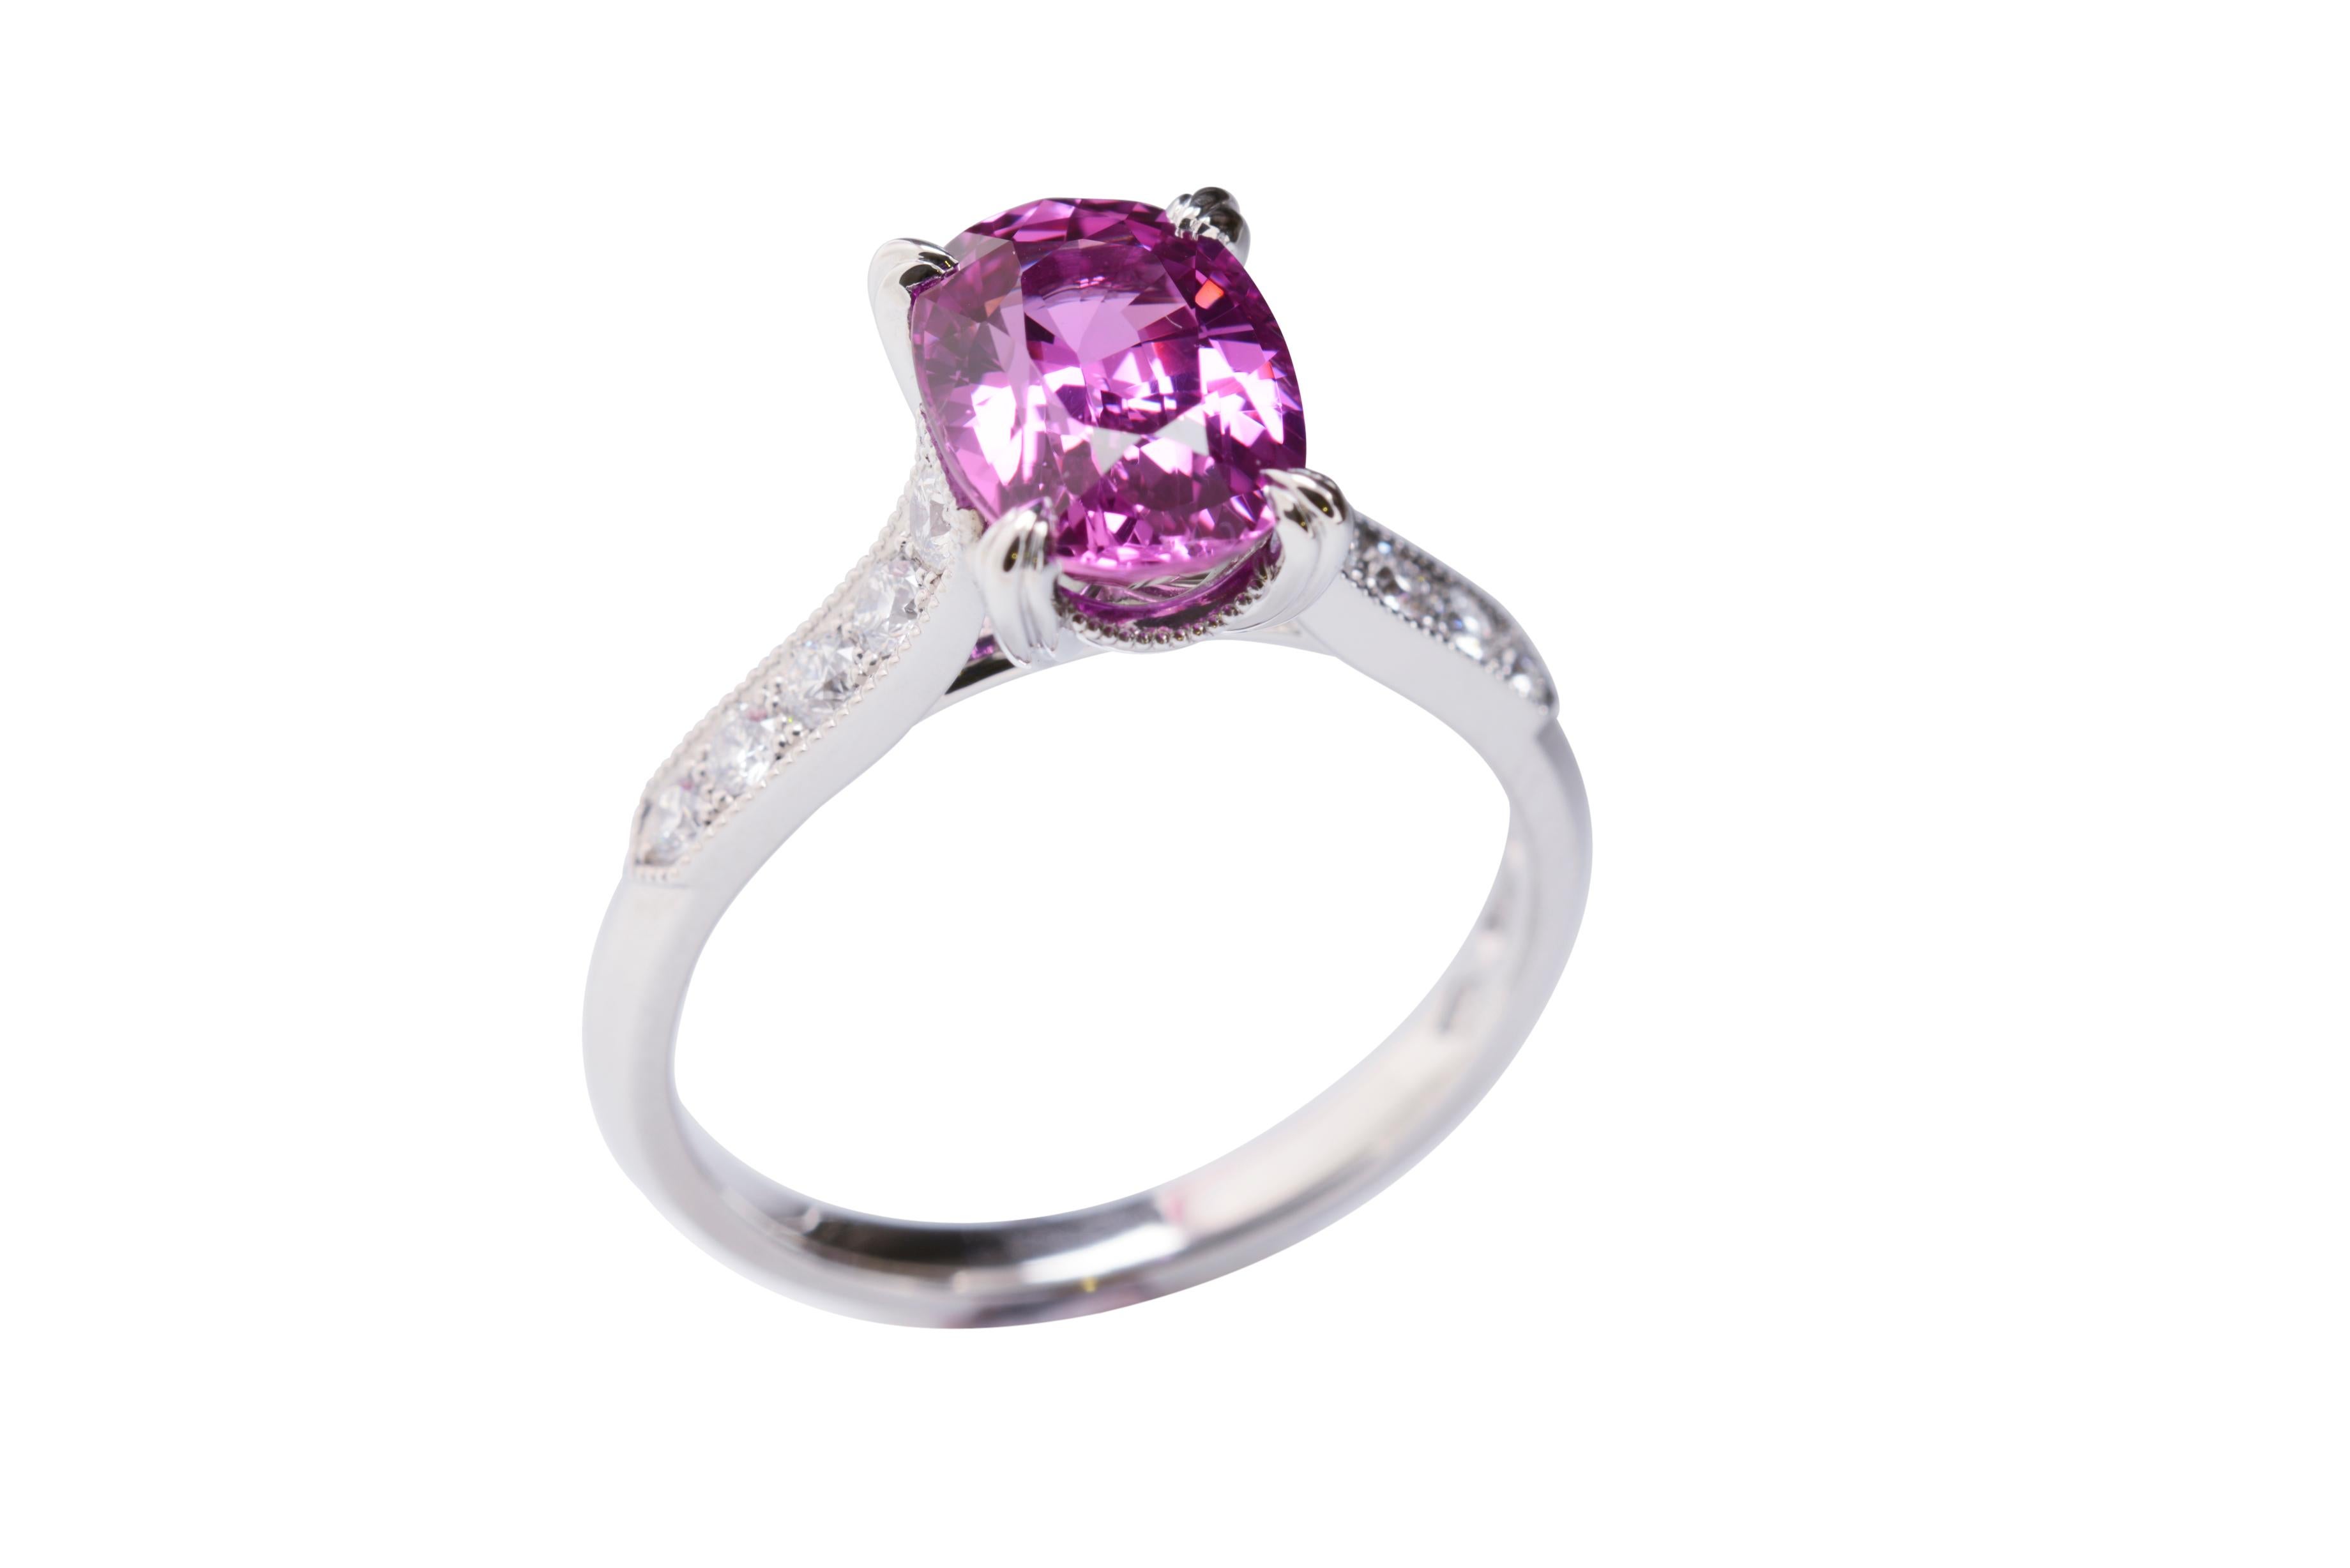 Modern 4.0 Carat Intense Pink Sapphire and Diamond Solitaire Ring in Platinum For Sale